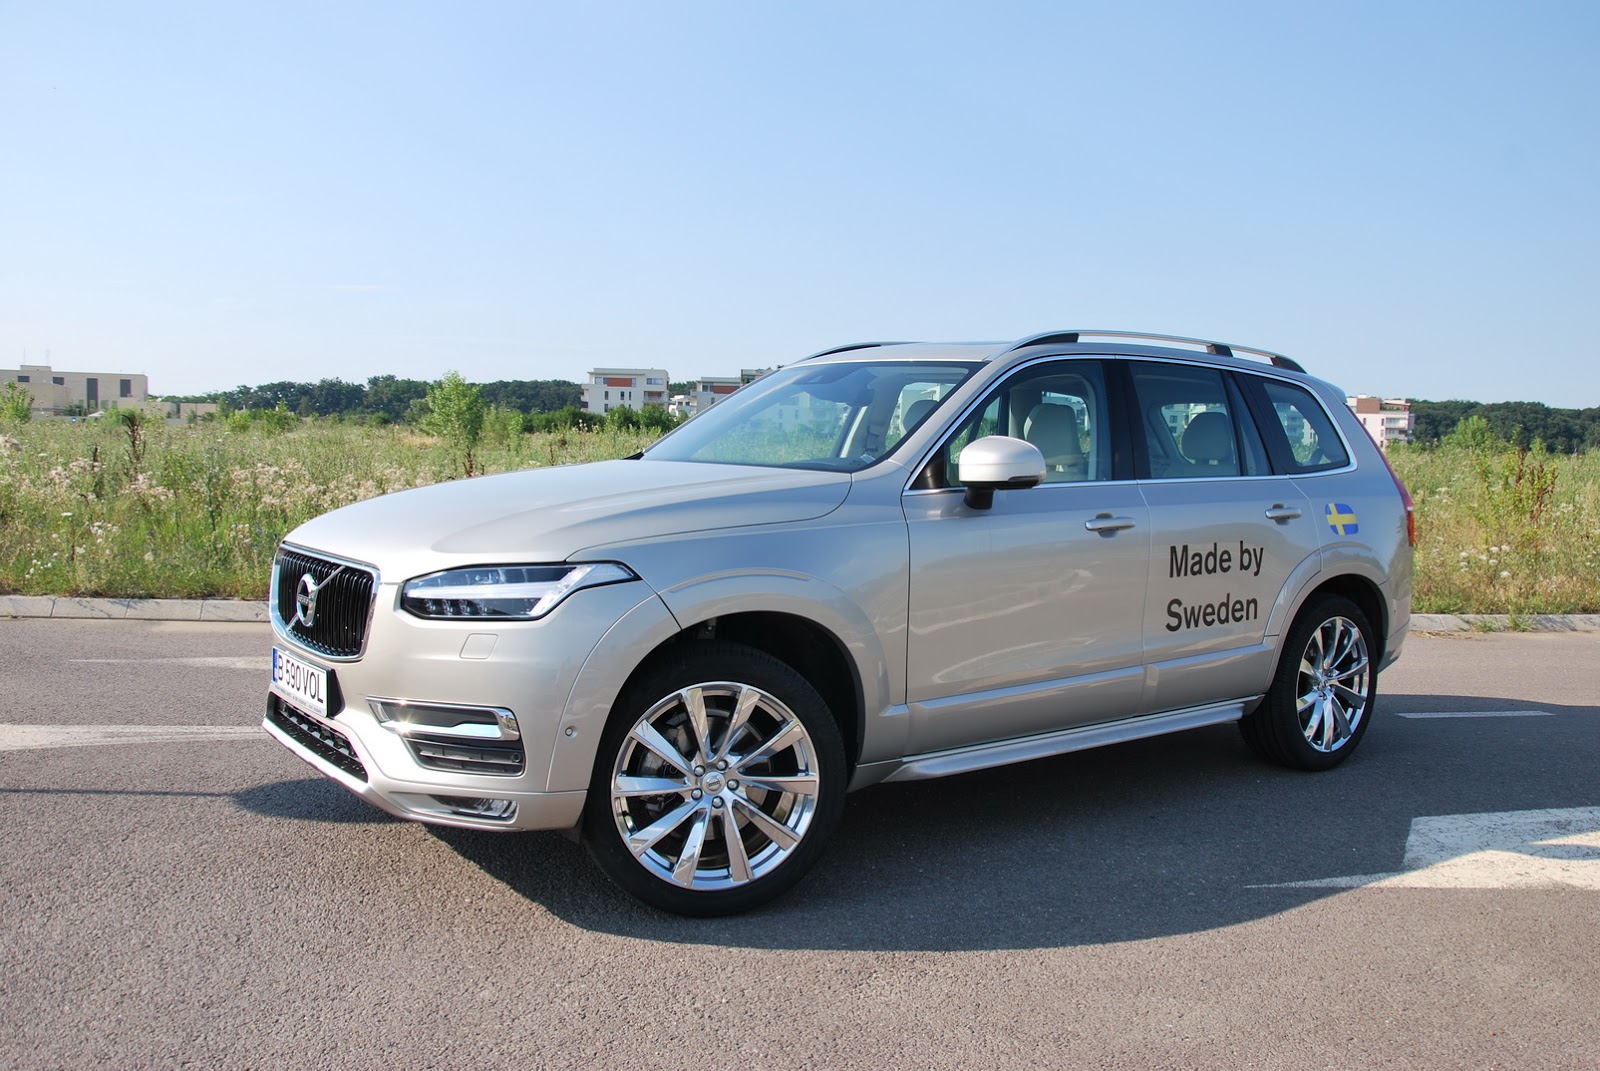 We Drive Volvo's All-New XC90 With A 224PS Diesel